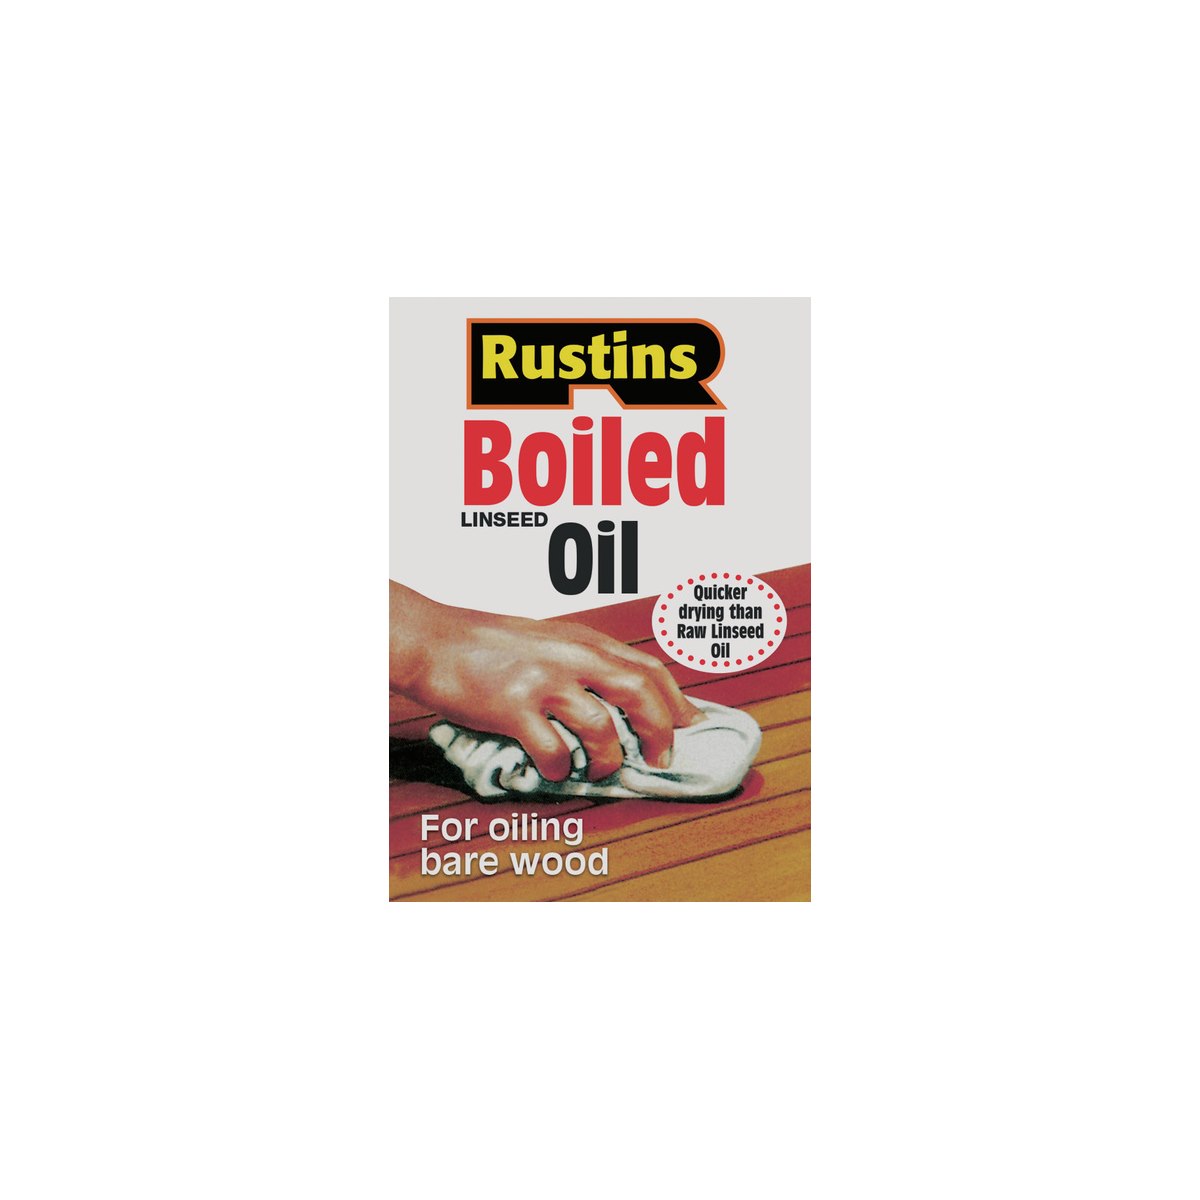 Where to Buy Boiled Linseed Oil